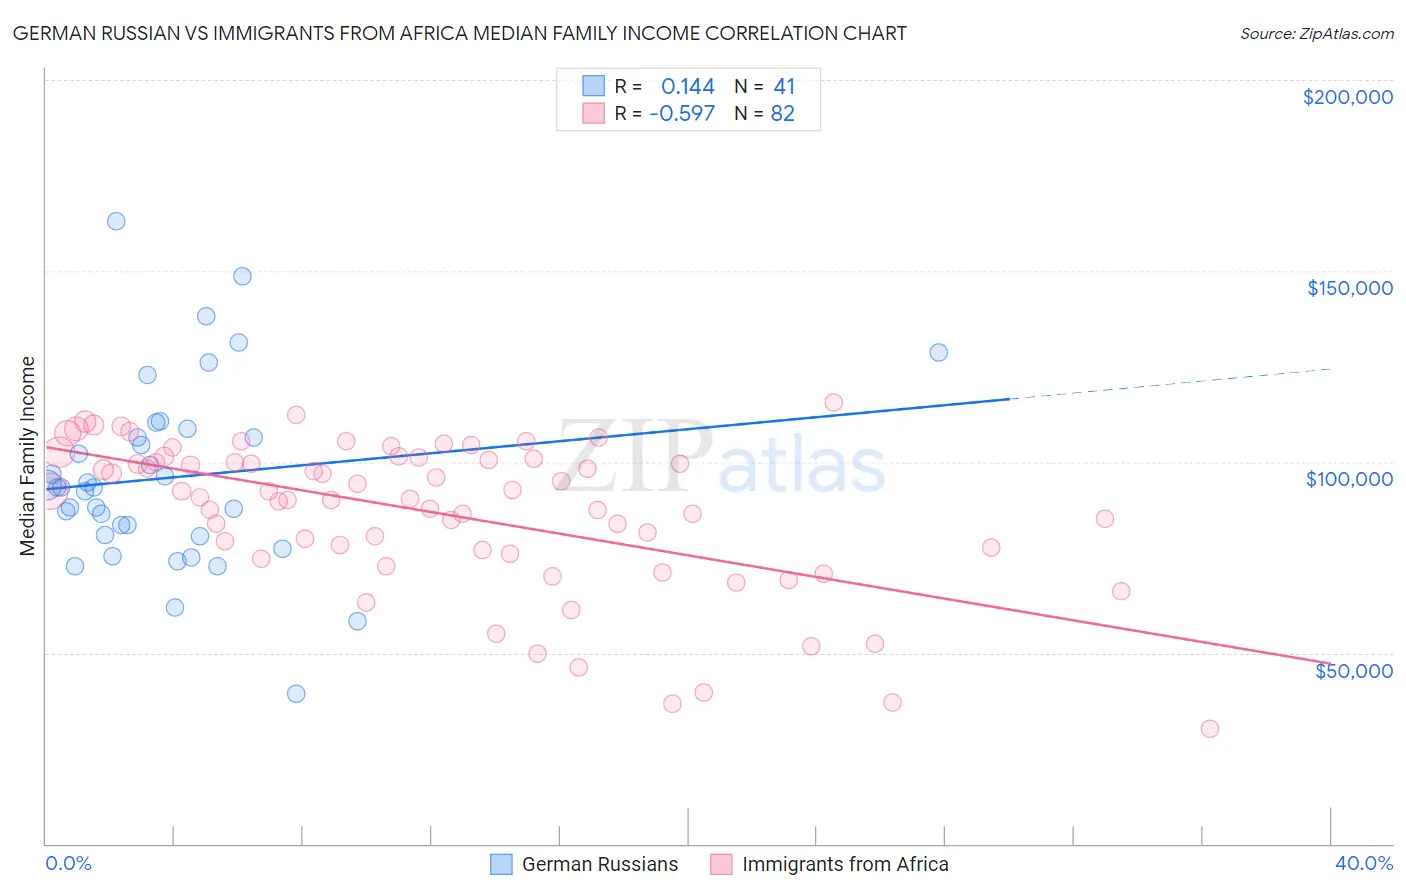 German Russian vs Immigrants from Africa Median Family Income